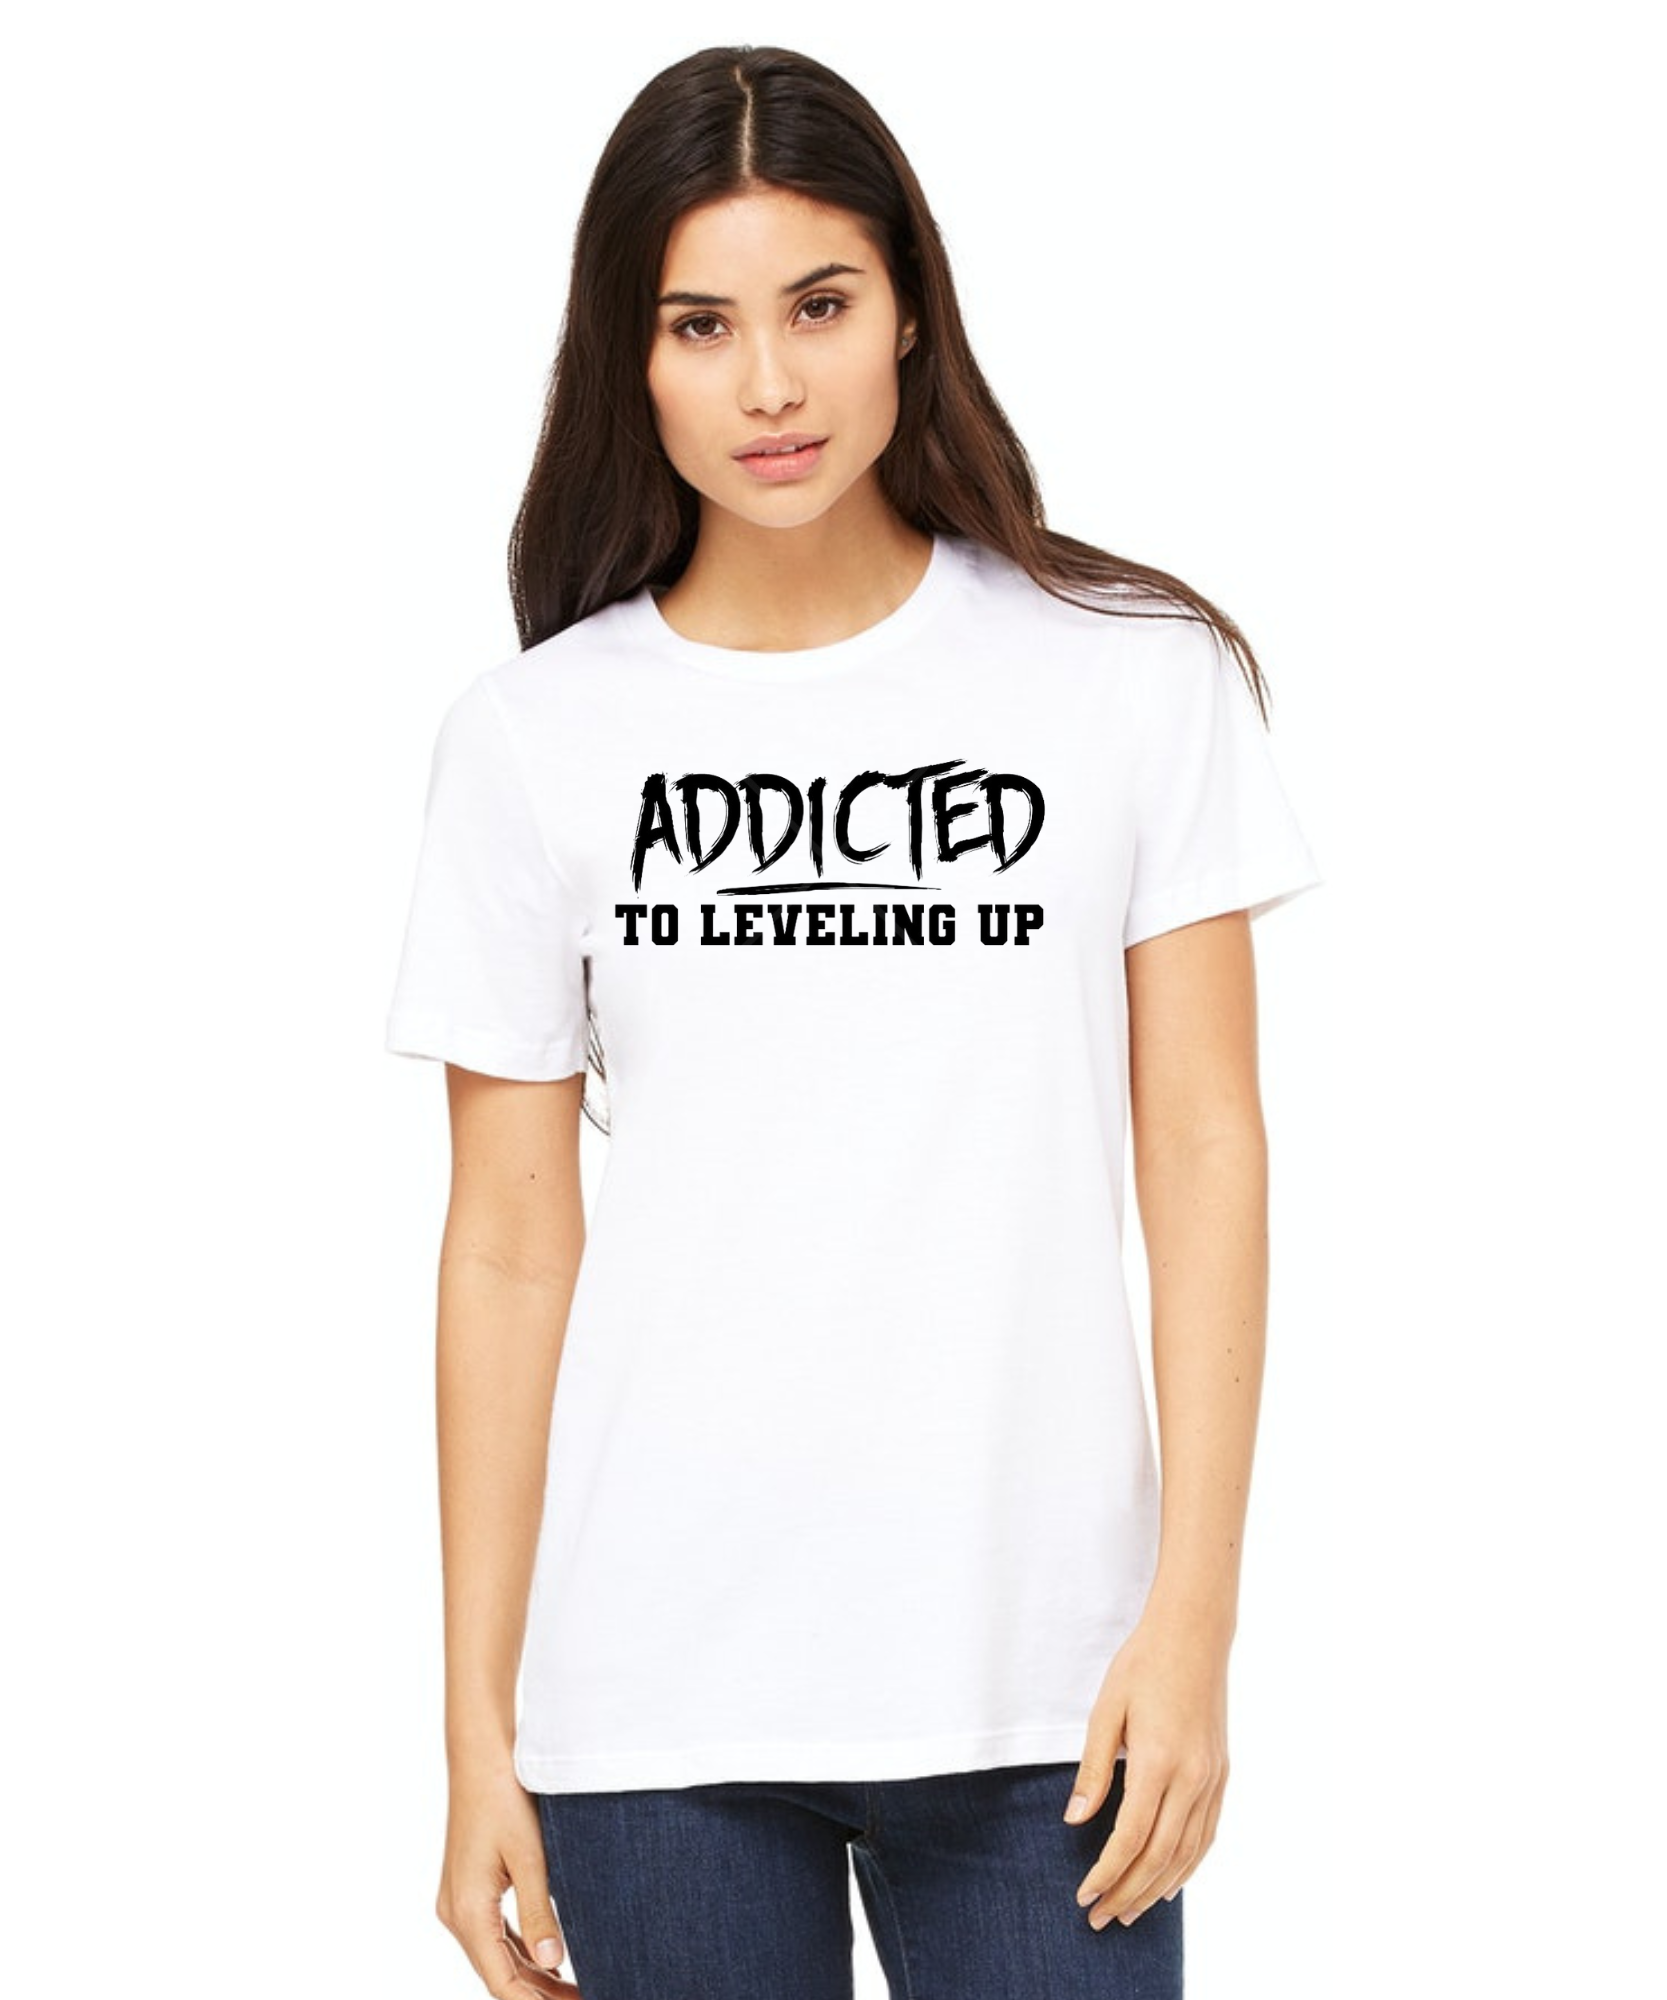 Addicted to Leveling Up